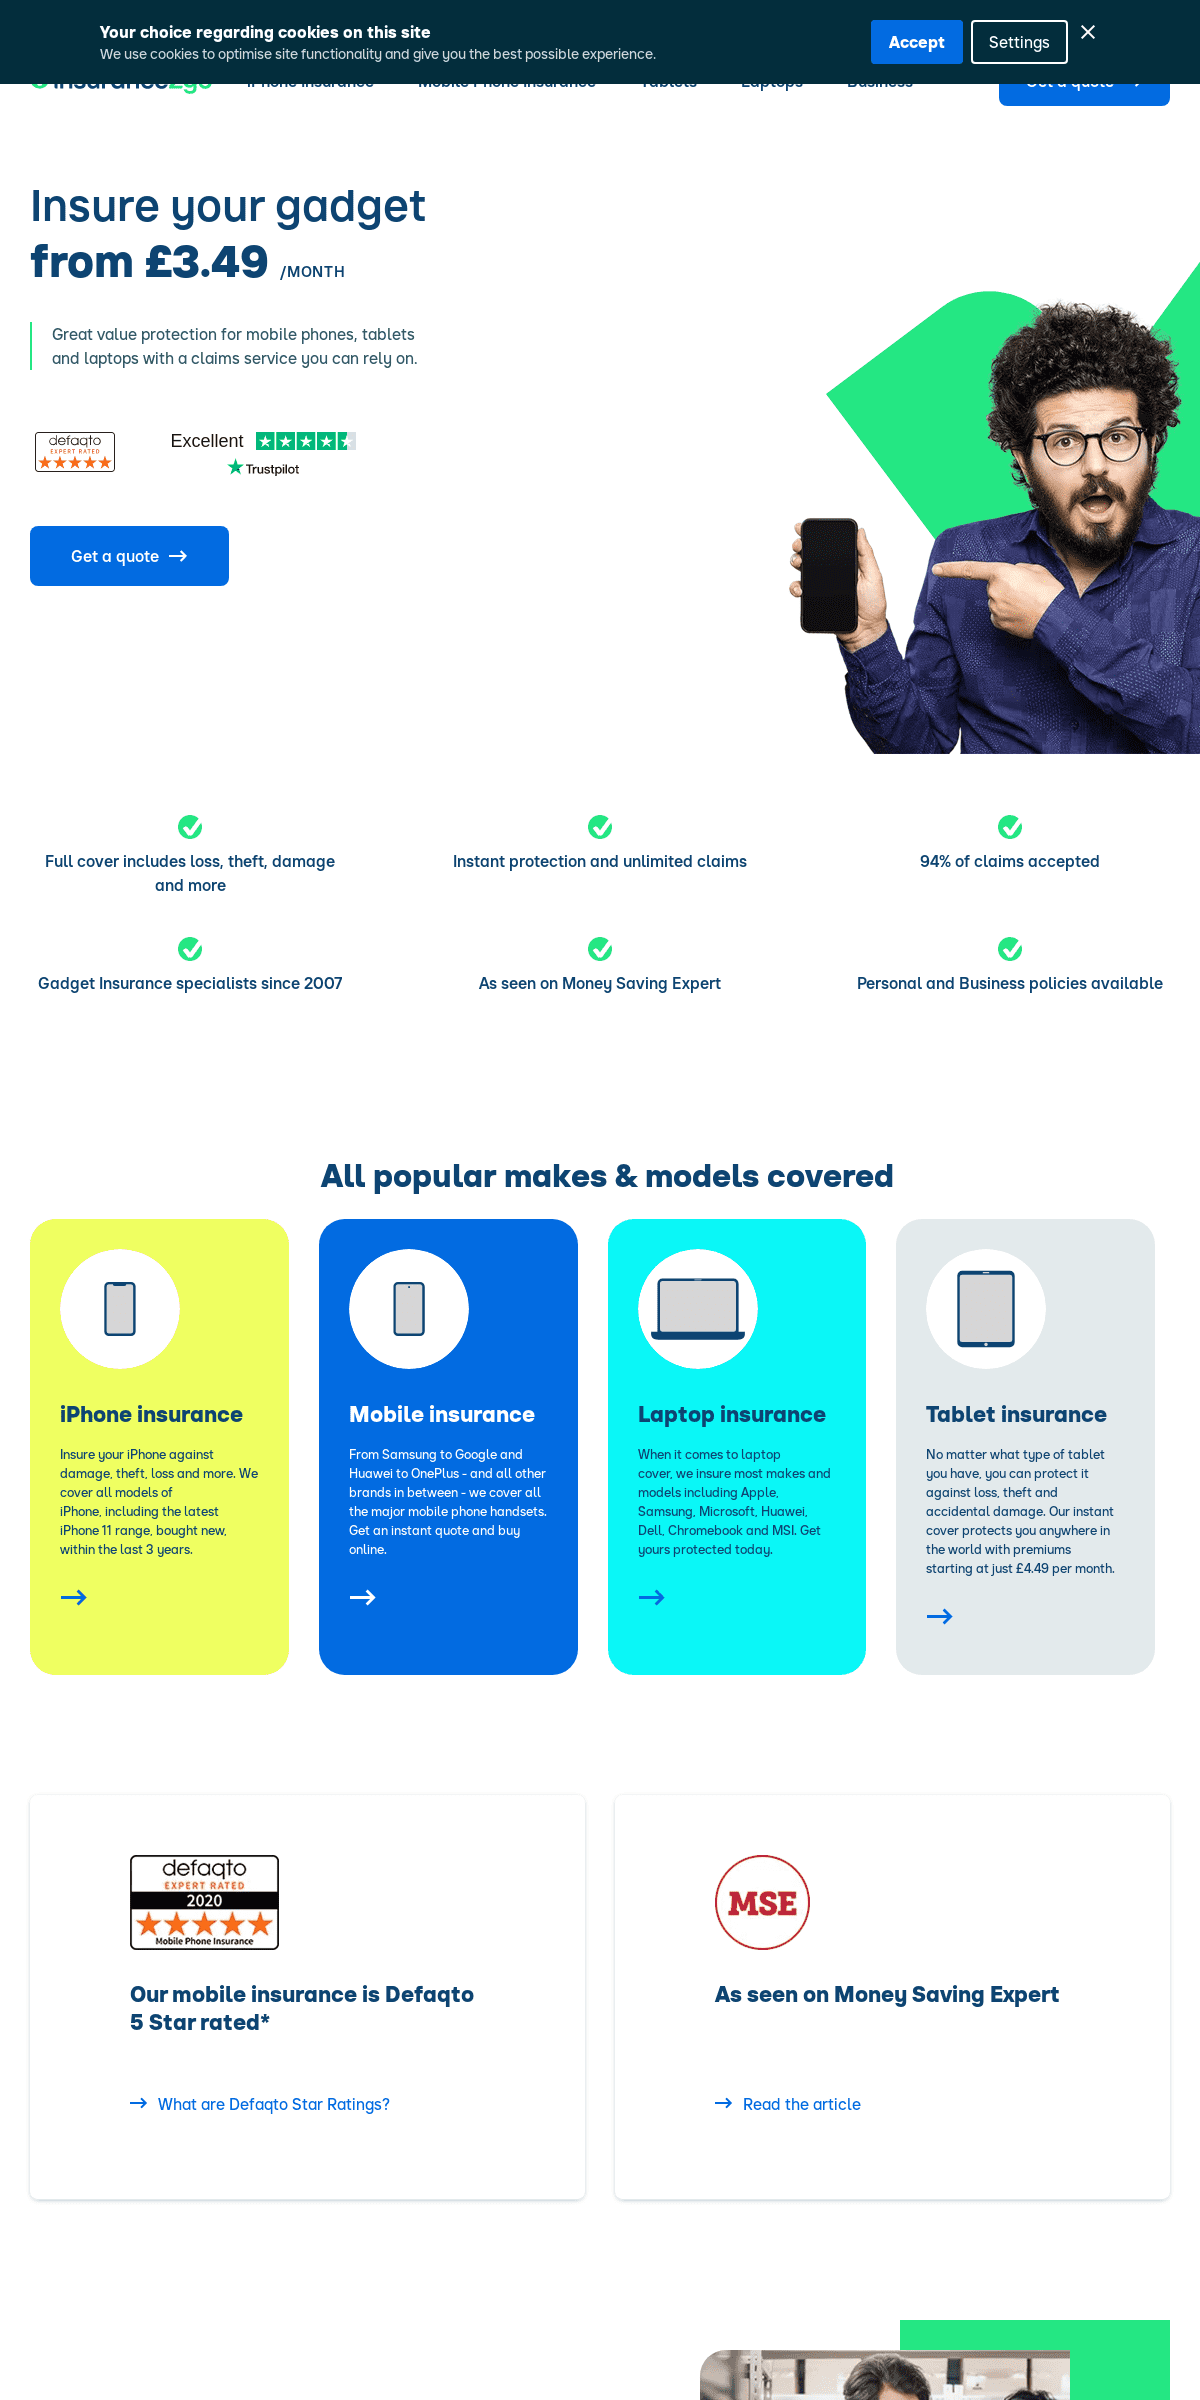 A complete backup of insurance2go.co.uk